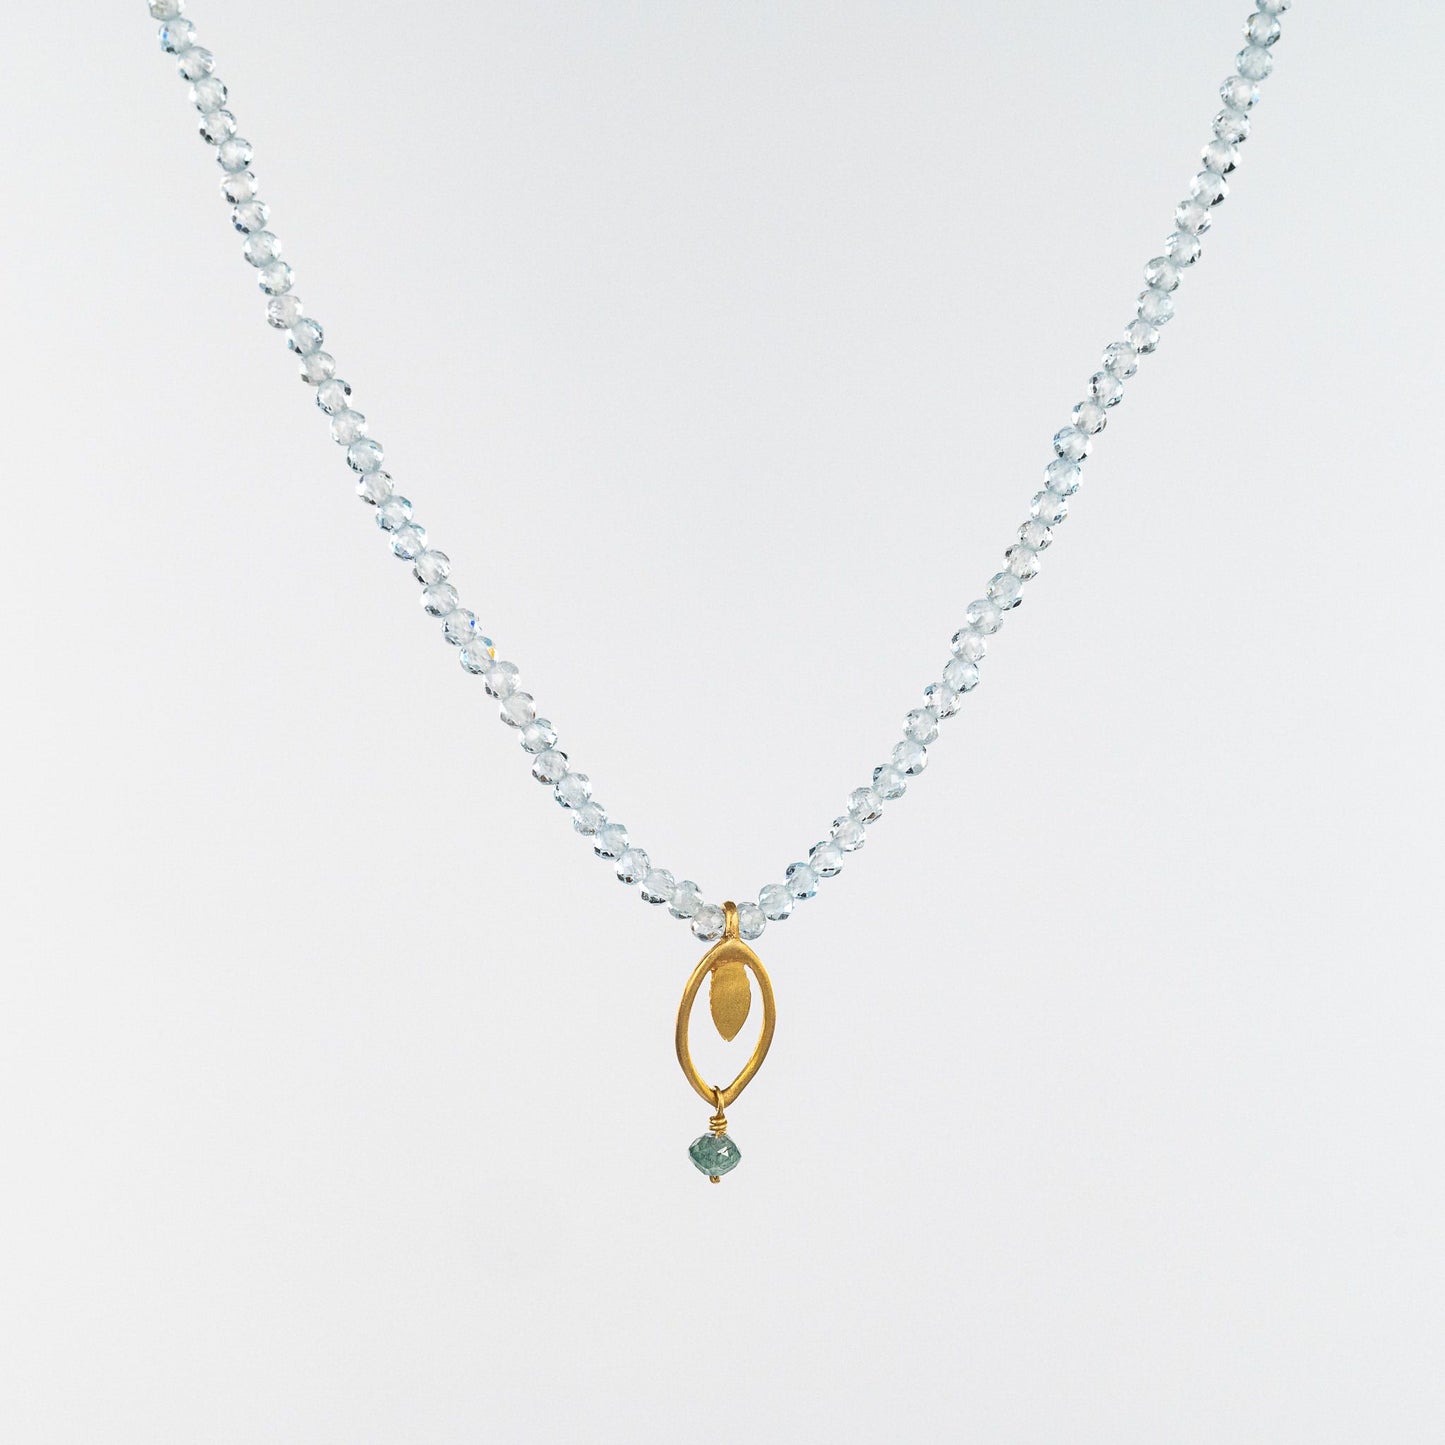 Blue Topaz Beaded Necklace with 18K Charm and Diamond Drop